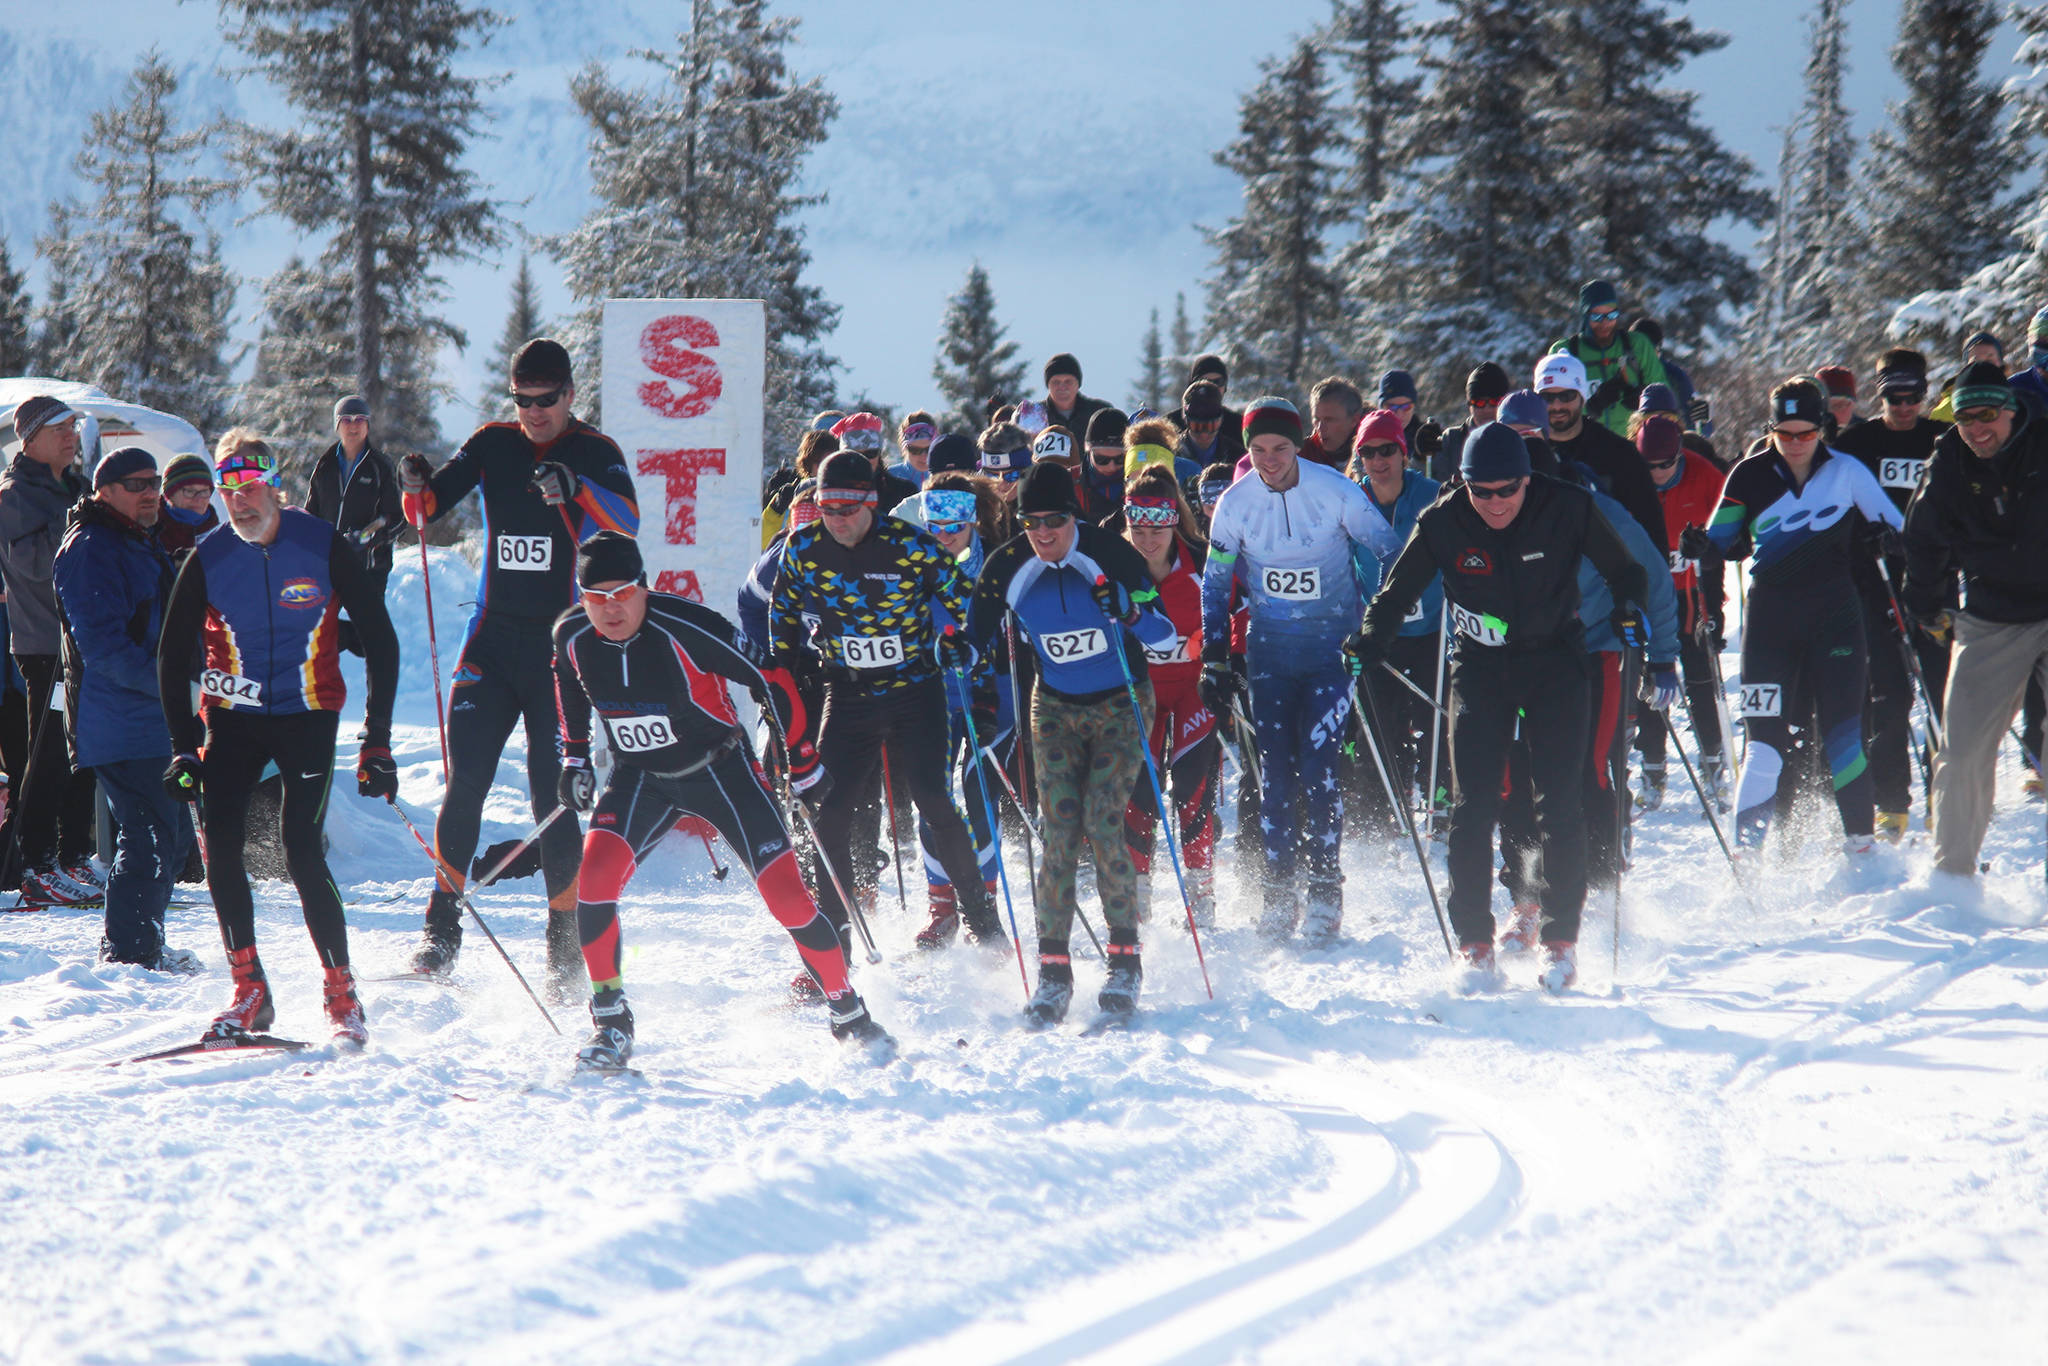 Skiers participating in the 42 Kilometer race take off from the starting line in this year’s Kachemak Bay Nordic Ski Marathon on Saturday, March 10, 2018 at the McNeil Canyon Ski Area outside of Homer, Alaska. (Homer News file photo)